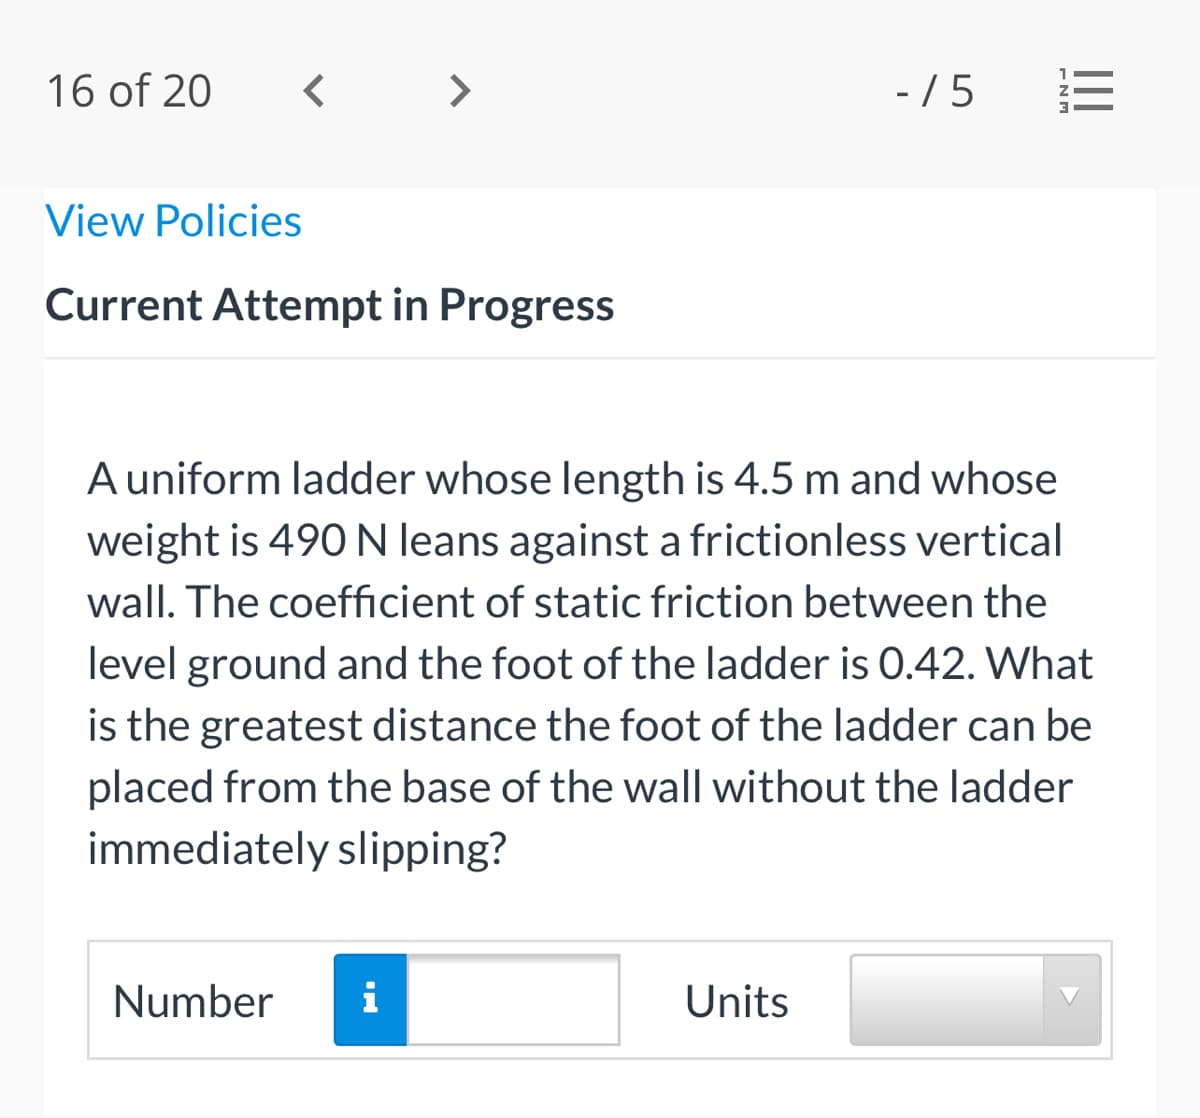 16 of 20
< >
-/5
View Policies
Current Attempt in Progress
A uniform ladder whose length is 4.5 m and whose
weight is 490 N leans against a frictionless vertical
wall. The coefficient of static friction between the
level ground and the foot of the ladder is 0.42. What
is the greatest distance the foot of the ladder can be
placed from the base of the wall without the ladder
immediately slipping?
Number
i
Units
II
ENM
